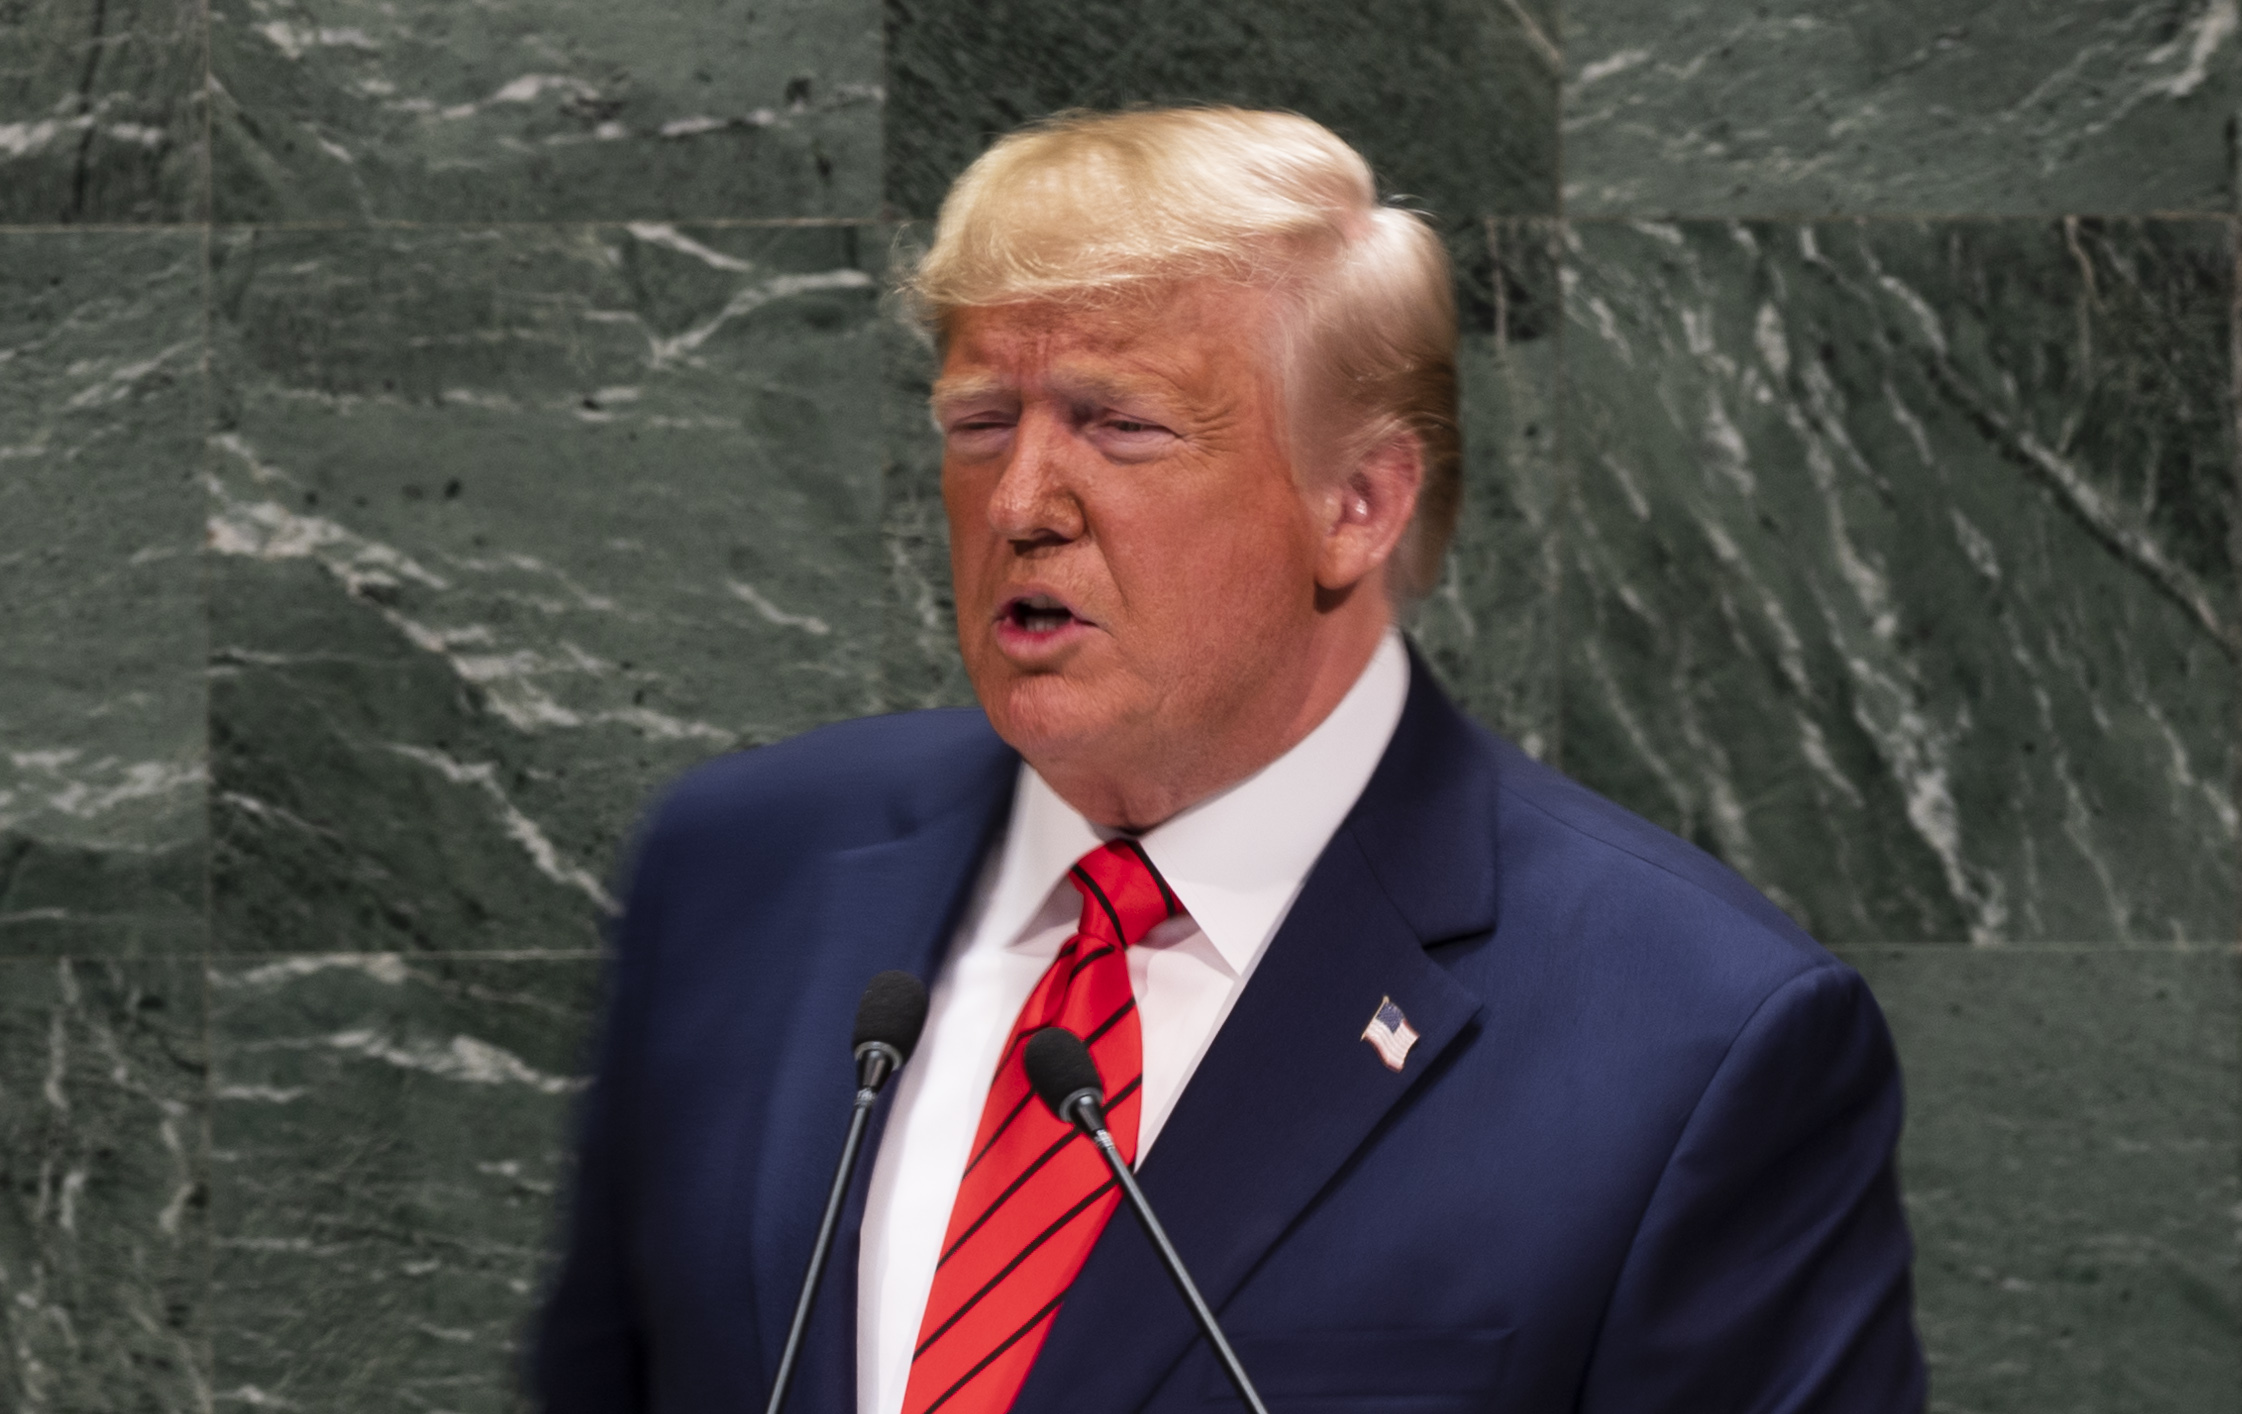 Live updates: President Trump's speech at the UN General Assembly